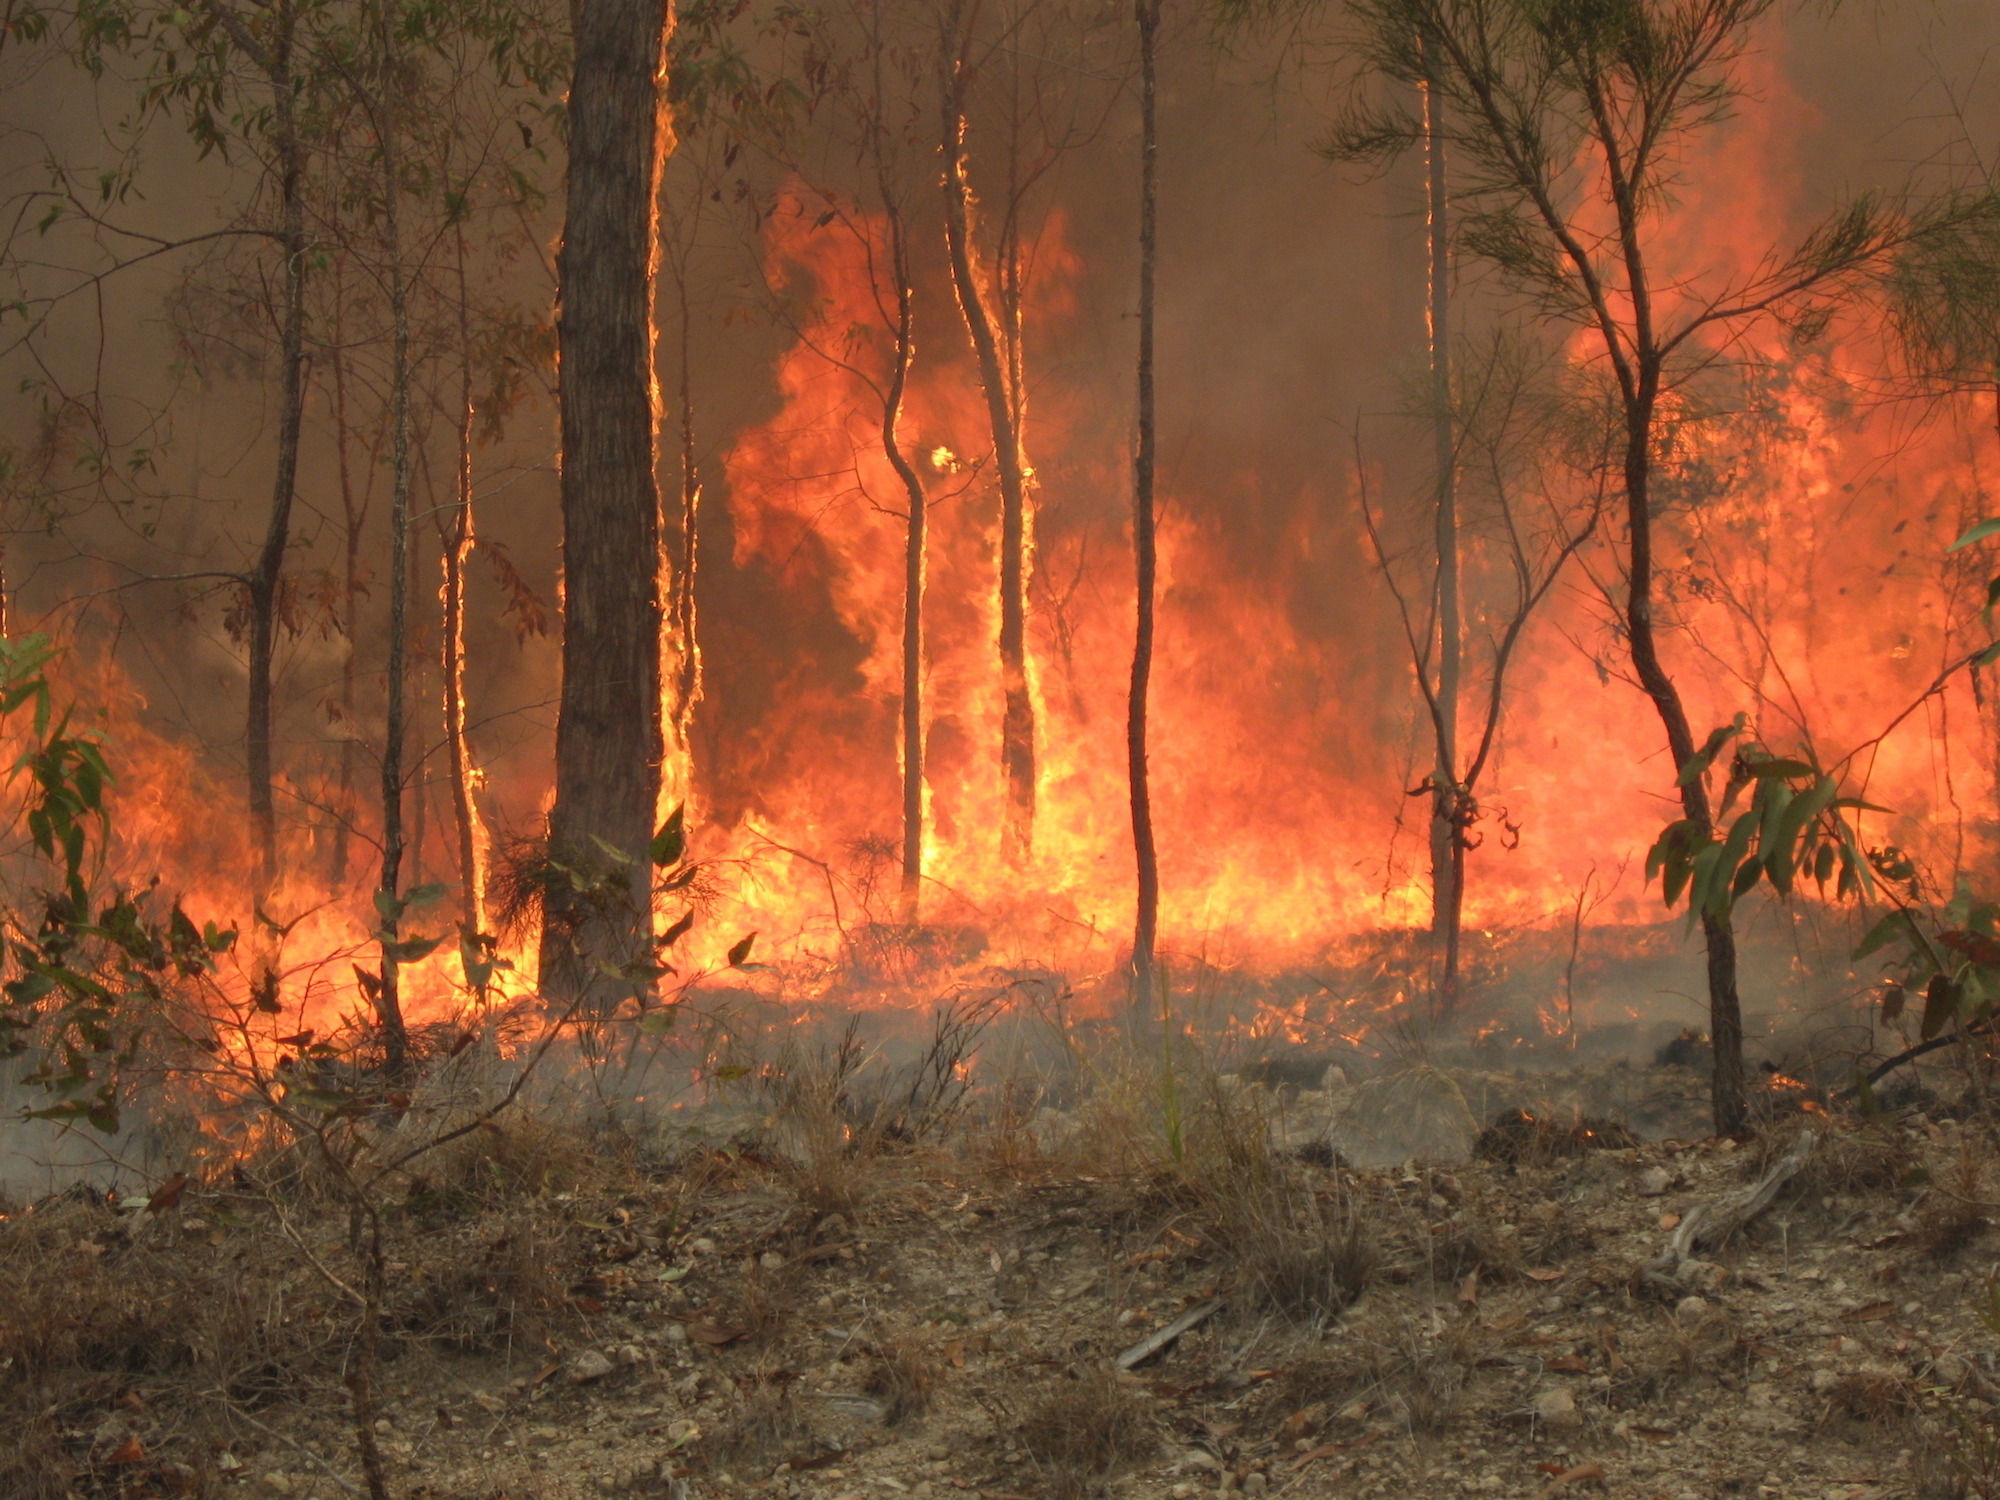 Australia Bushfire Disaster: What Can You Do to Help?